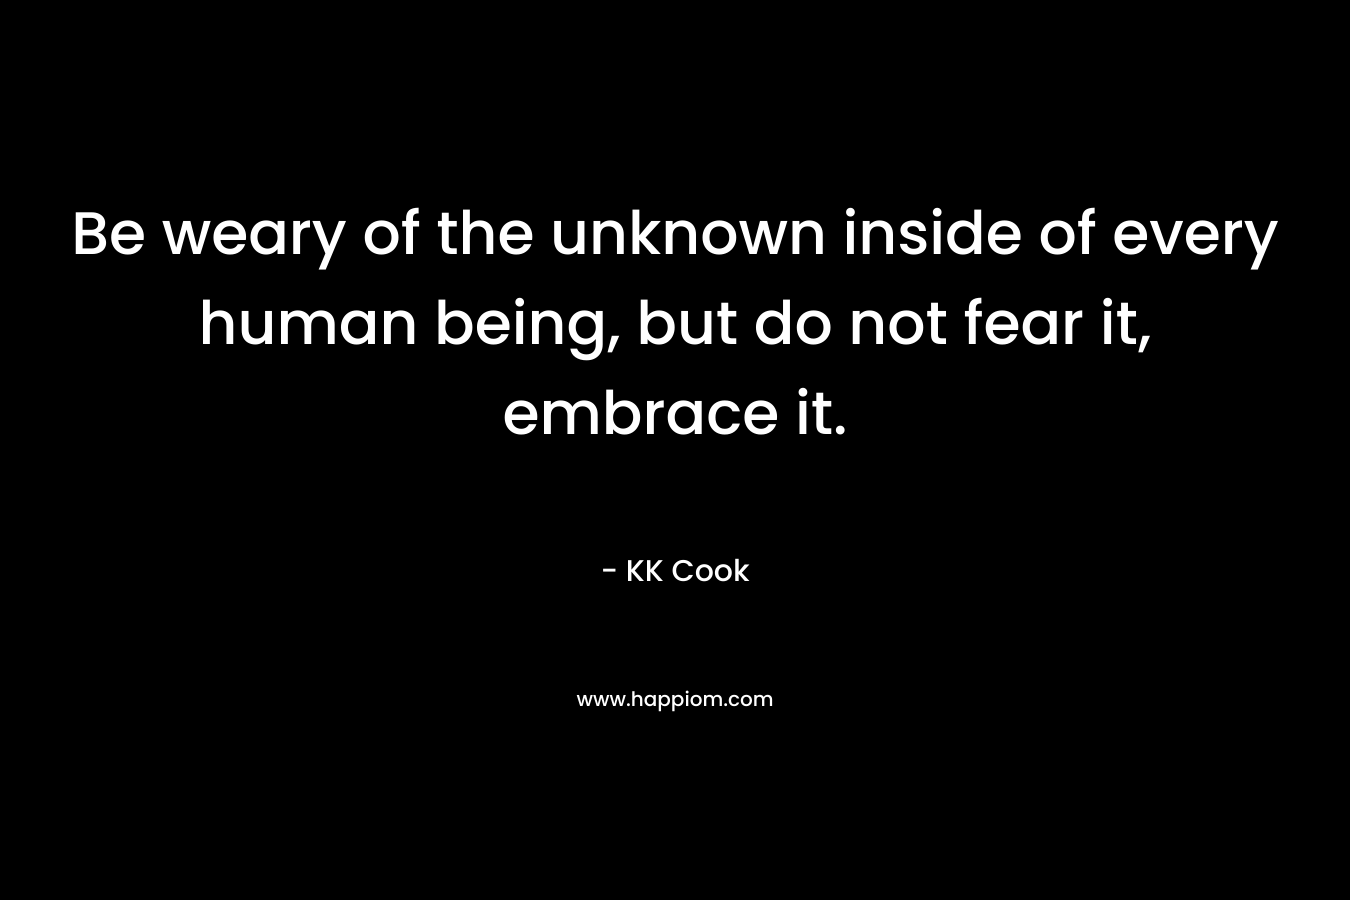 Be weary of the unknown inside of every human being, but do not fear it, embrace it. – KK Cook